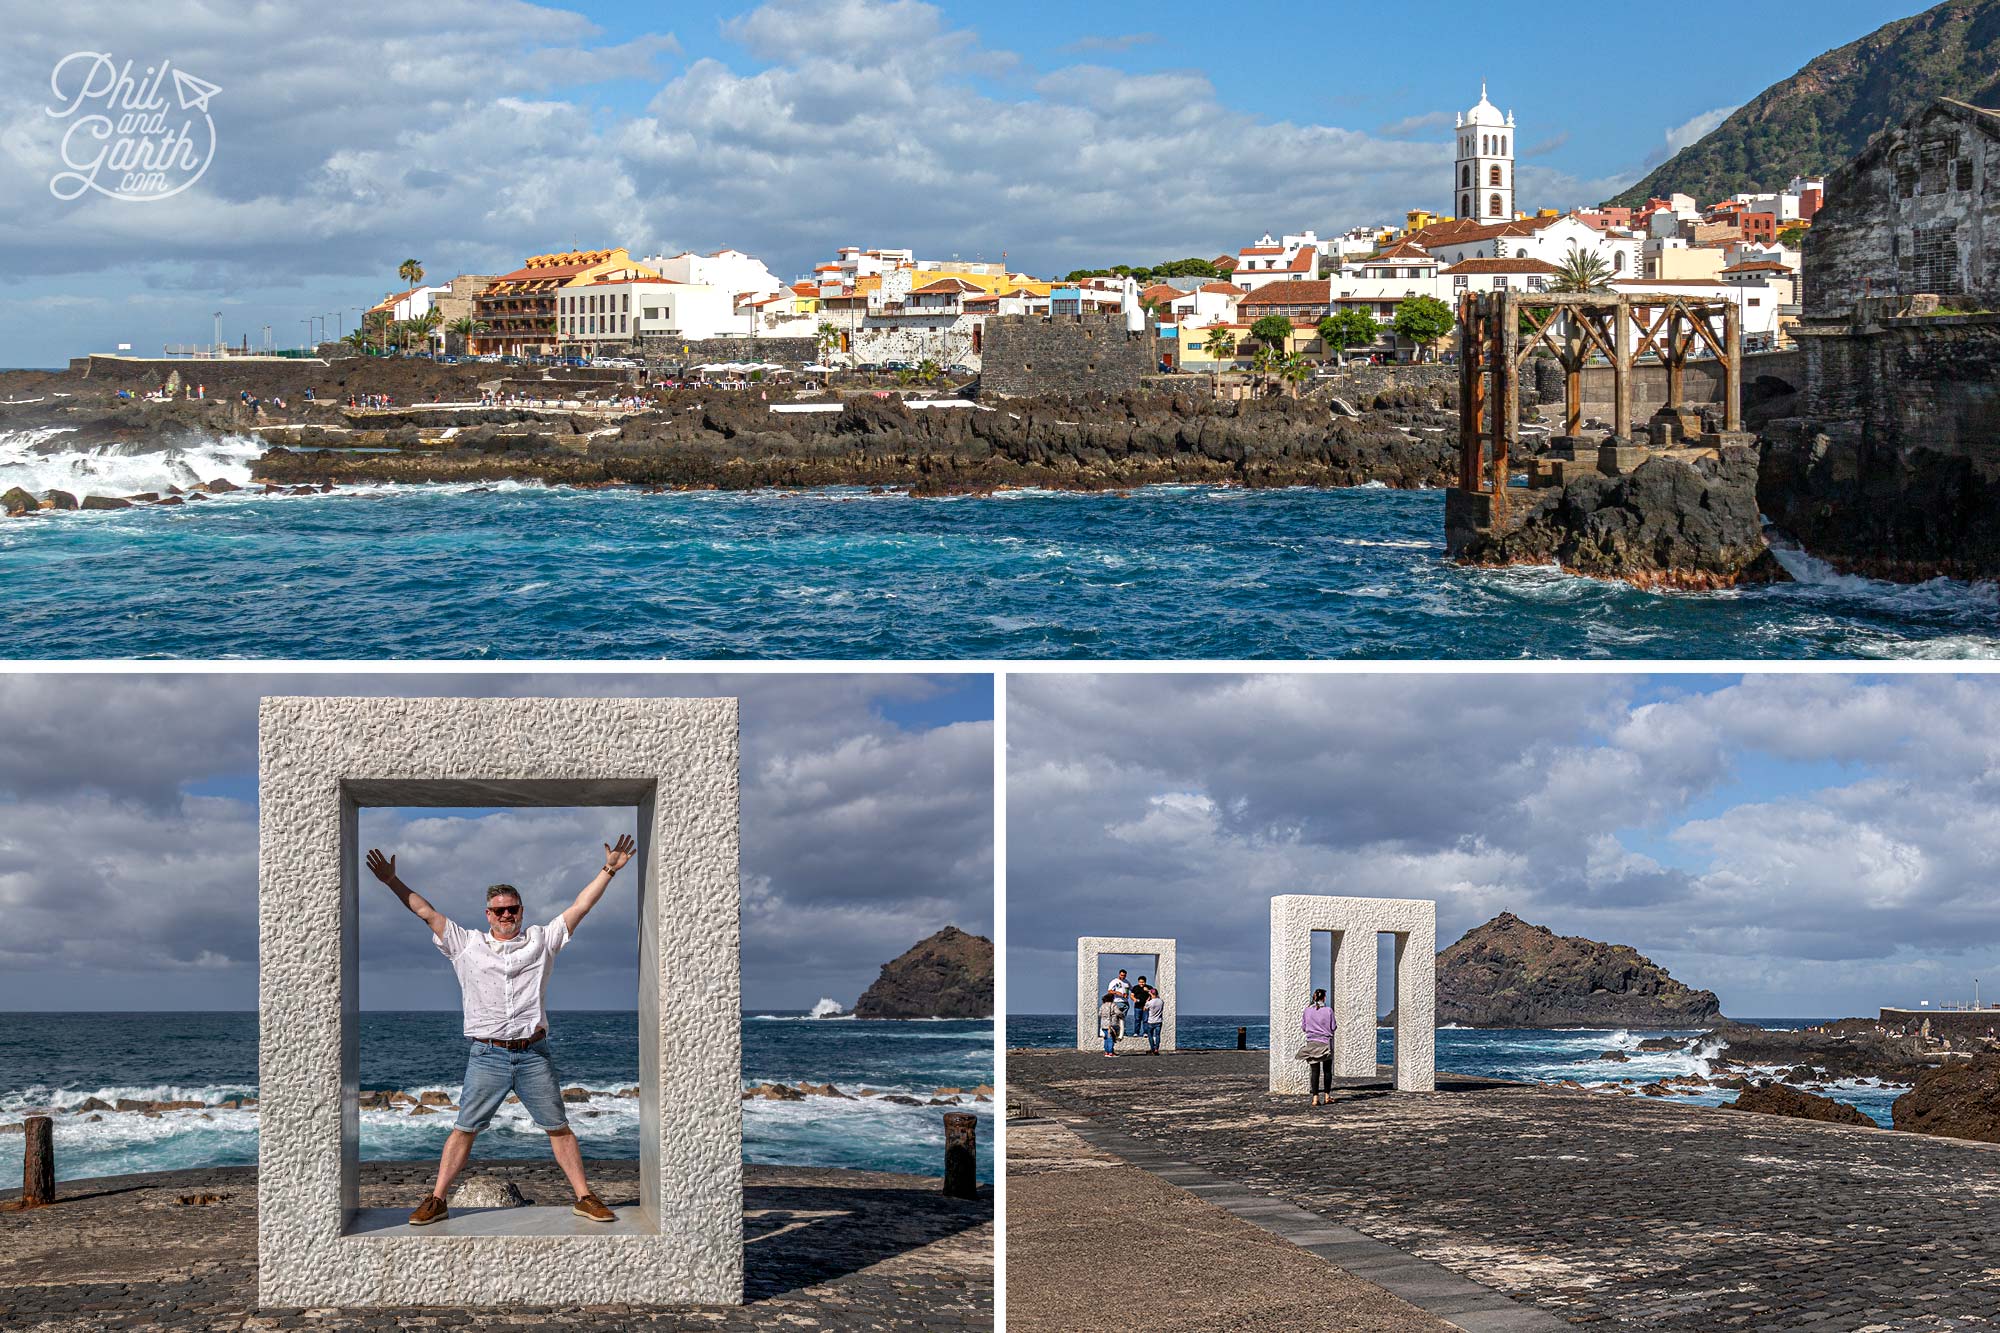 Great views of Garachico from these sculptures on the promenade